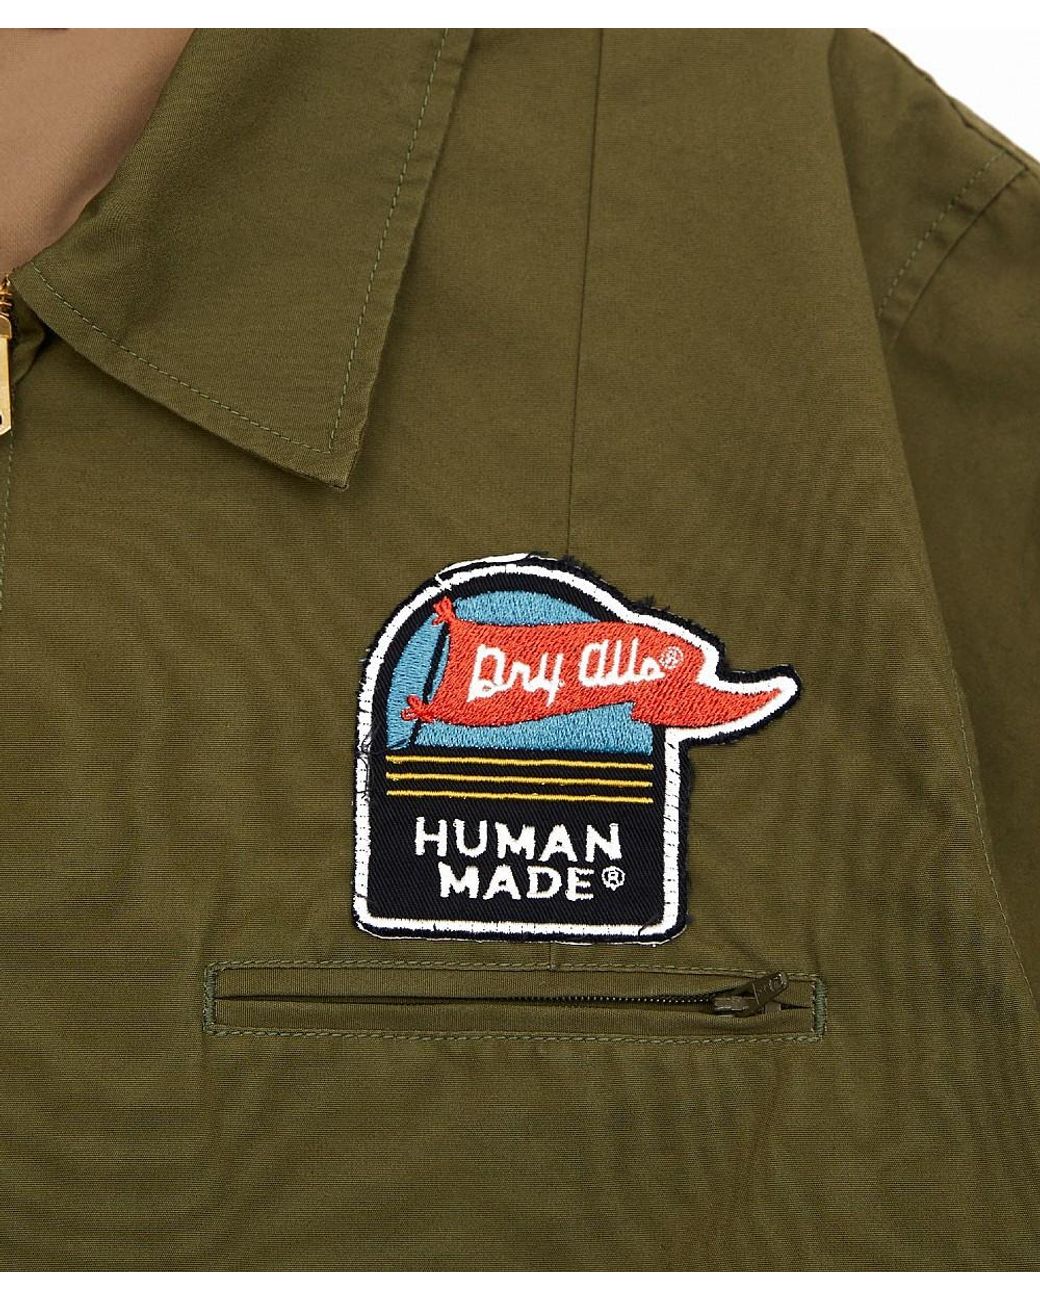 Human Made Patch Jacket in Olive (Green) for Men | Lyst